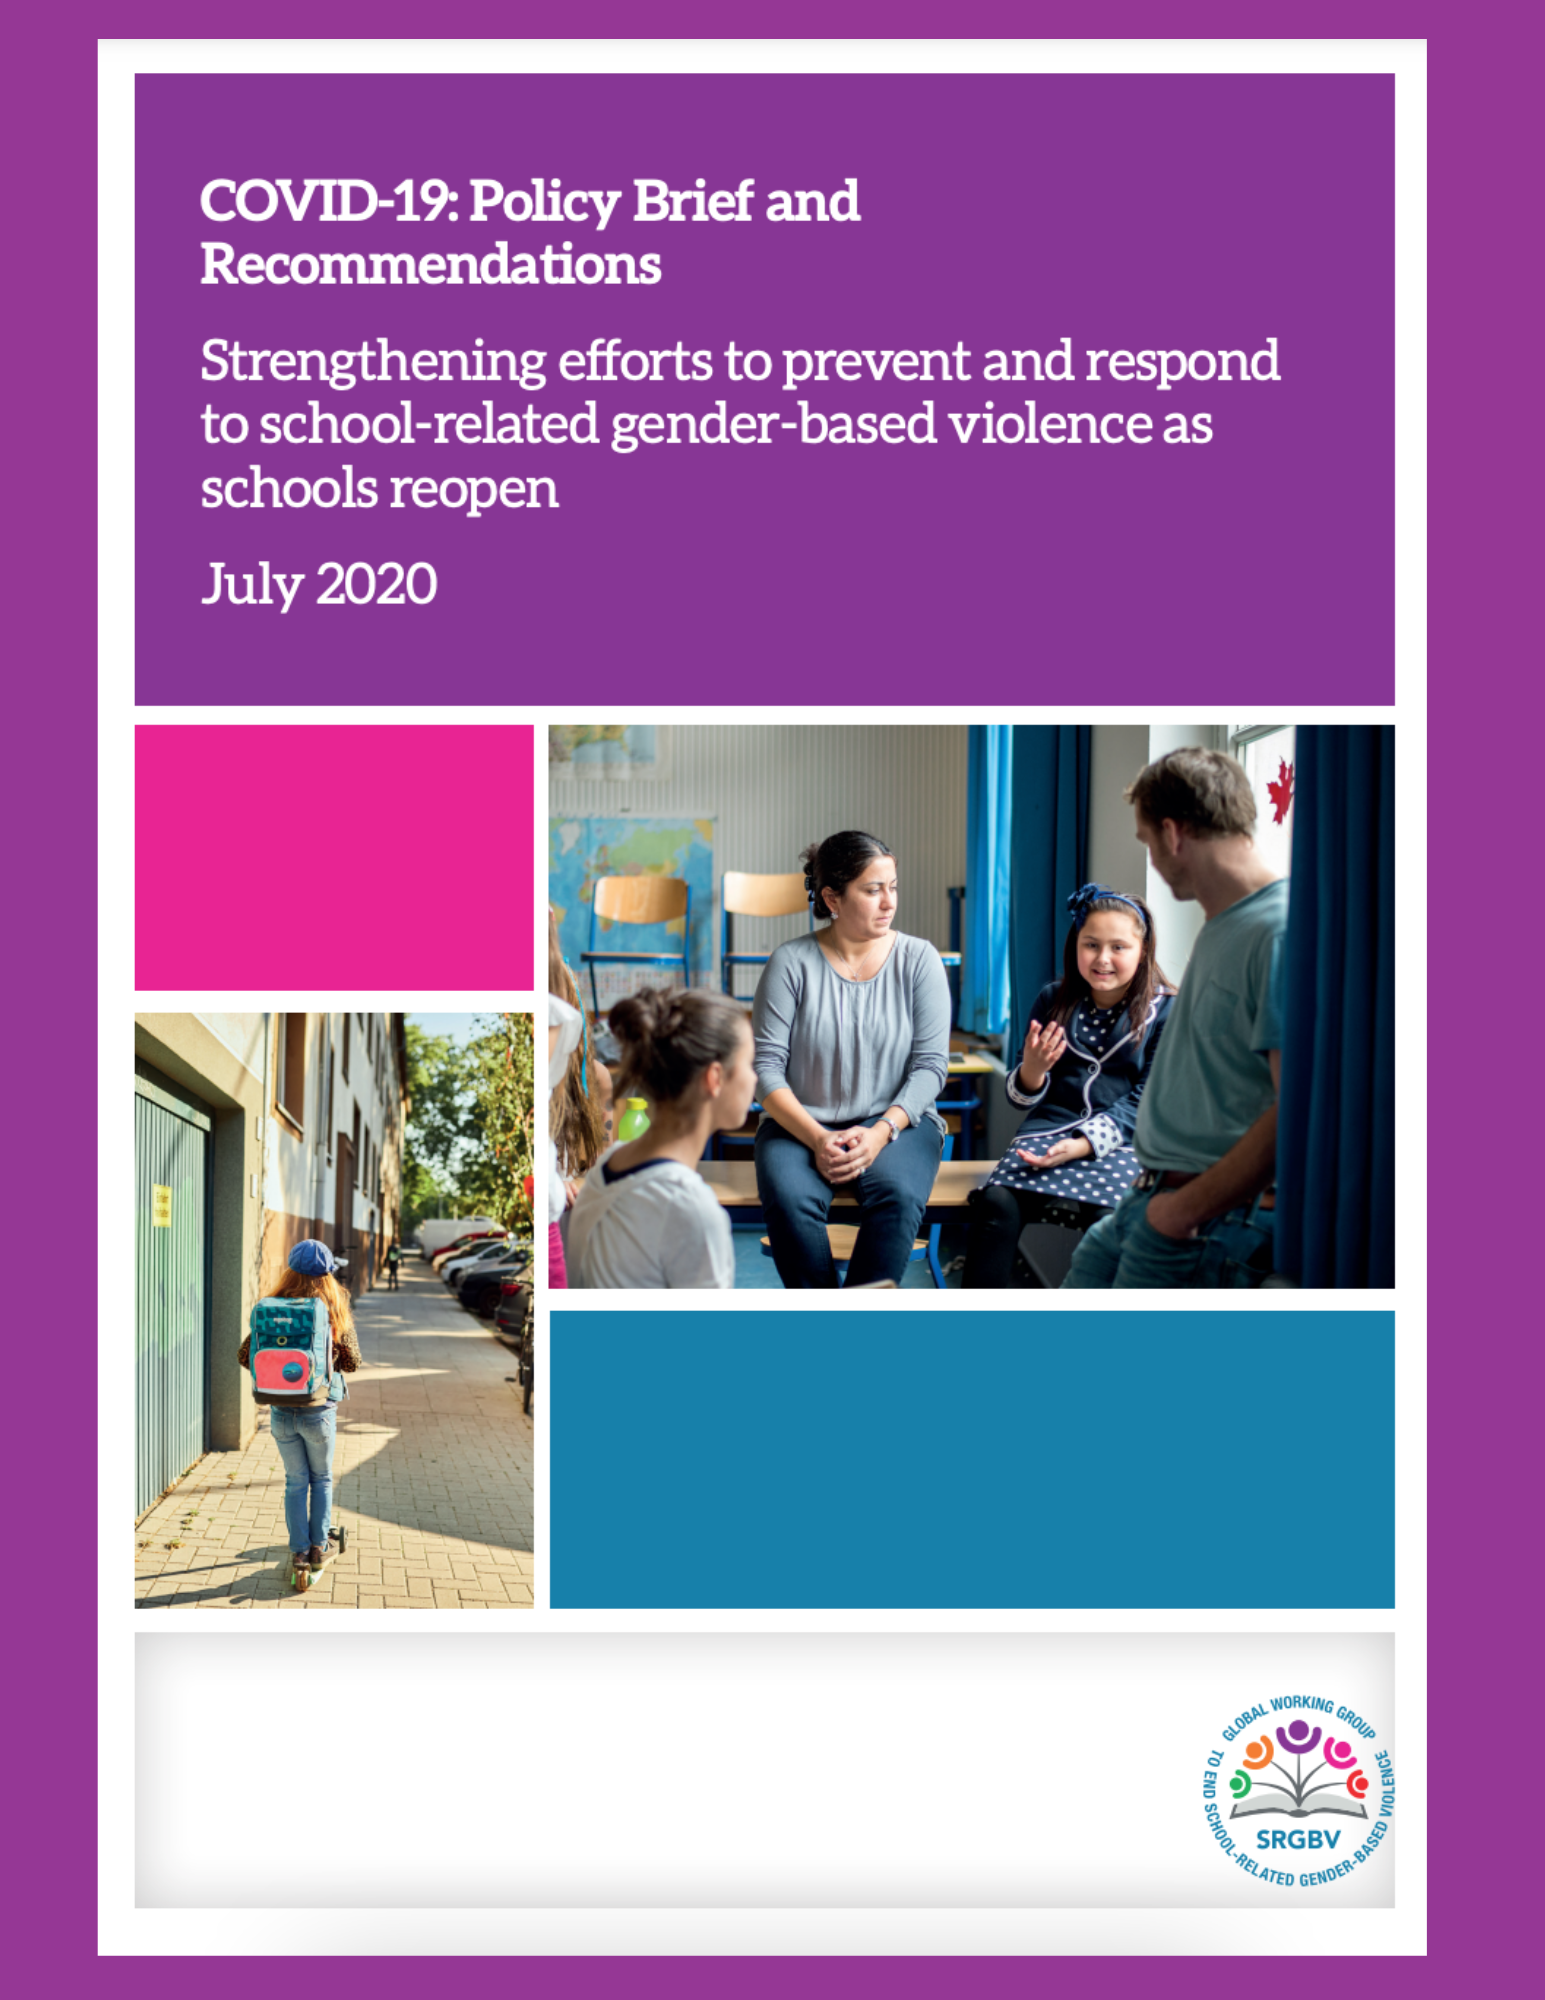 COVID-19: Policy Brief and Recommendations: Strengthening efforts to prevent and respond to school-related gender-based violence as schools reopen